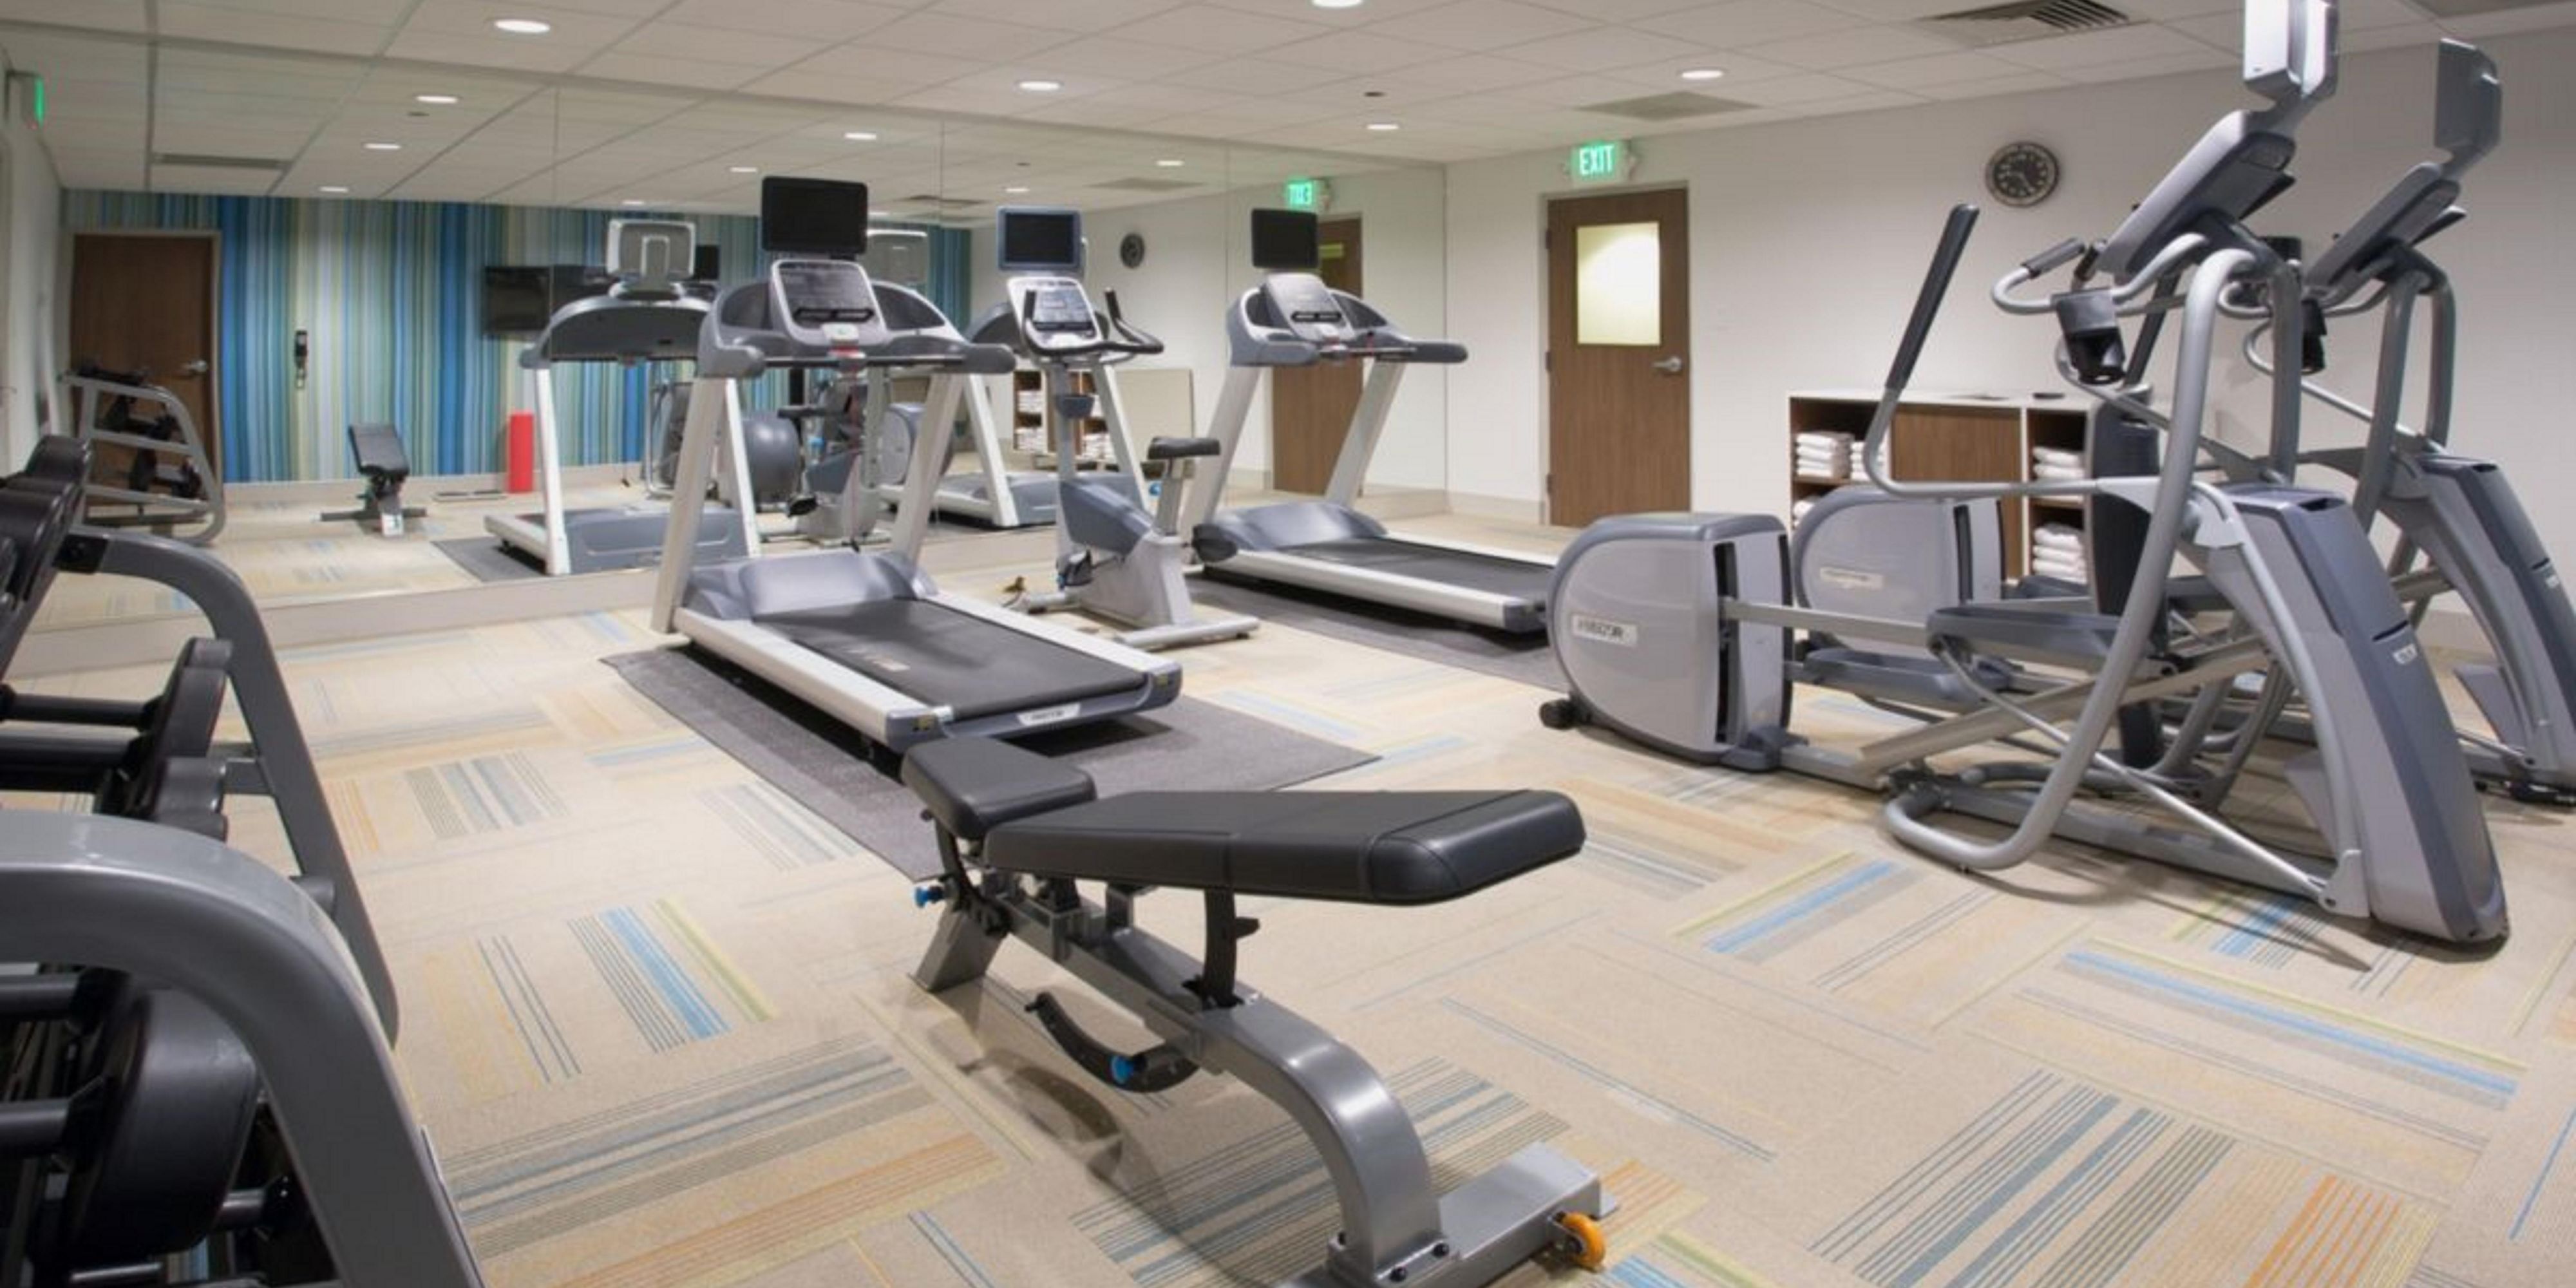 Turbocharge your energy in our modern fitness center with state-of-the-art strength training equipment, yoga balls and cardio machines.